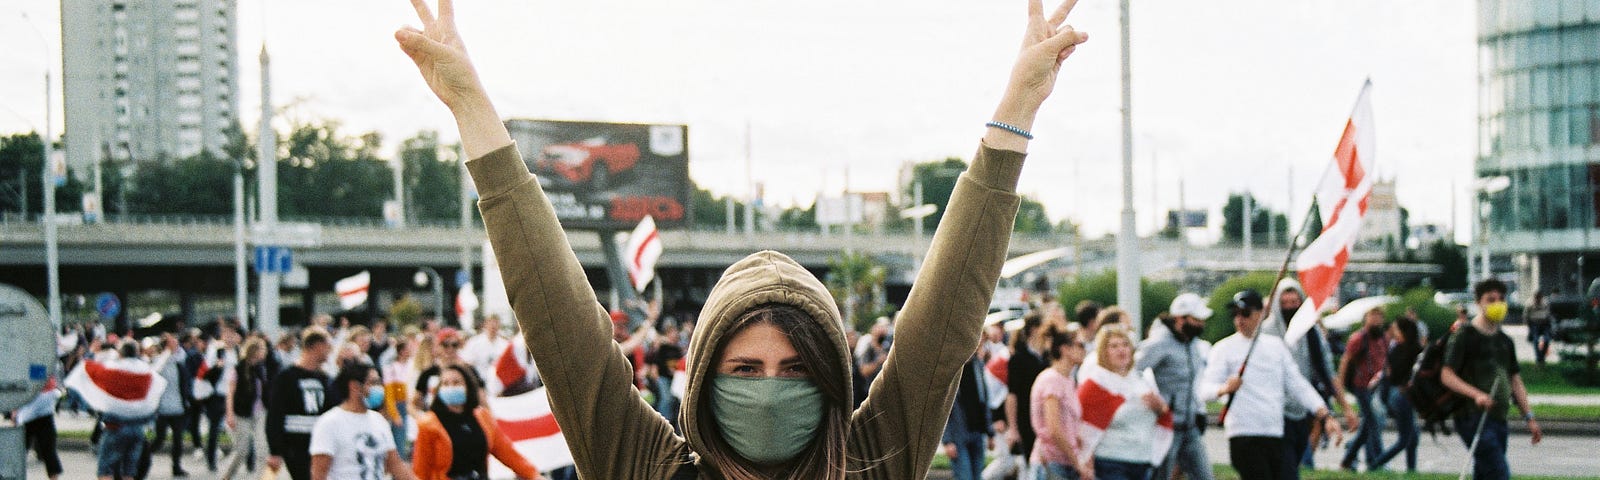 women with raised arms in front of barracaded street protest